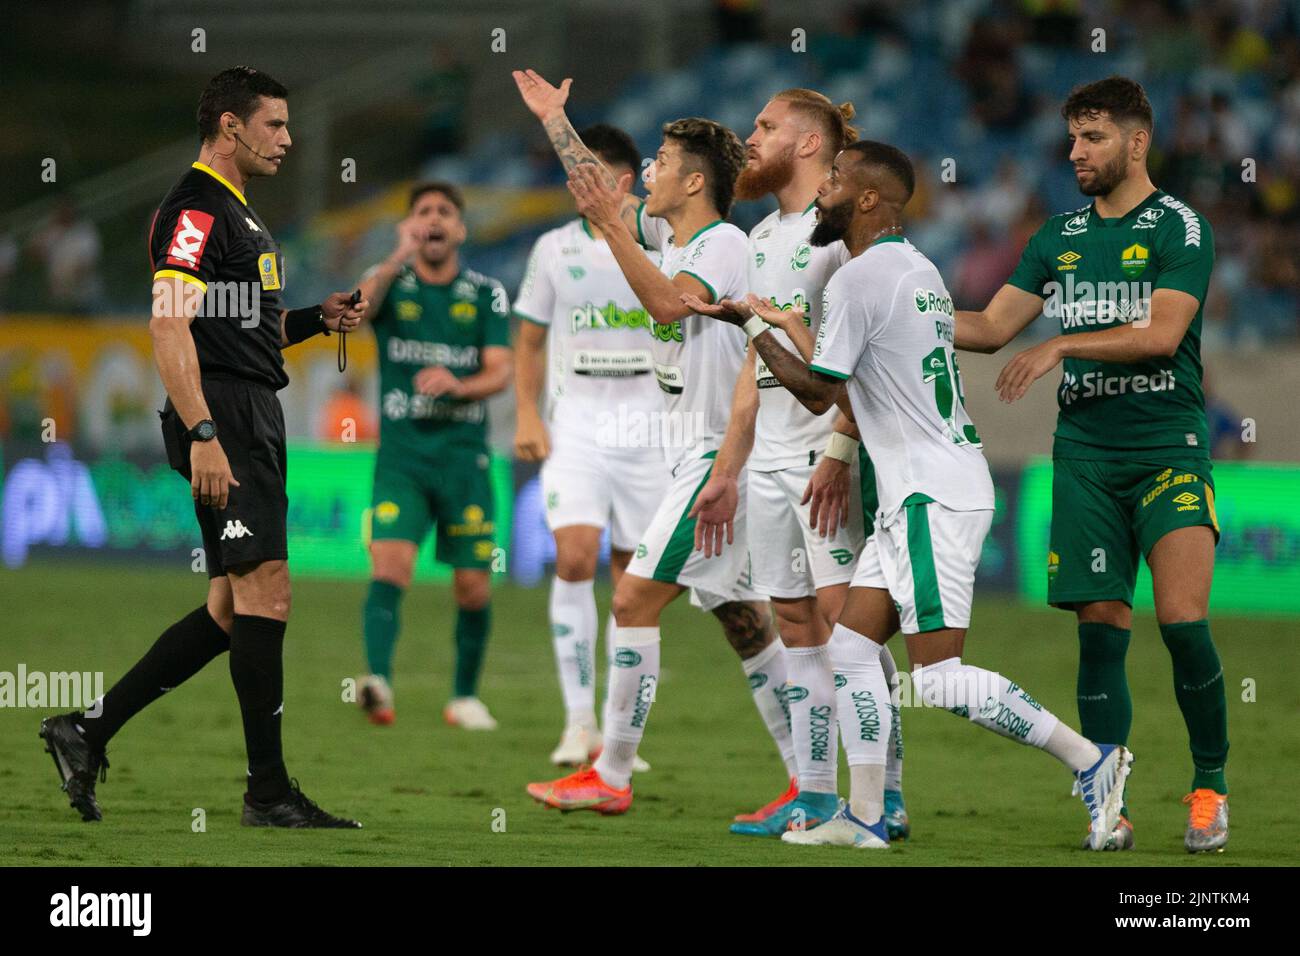 Cuiaba, Brazil. 13th Aug, 2022. MT - Cuiaba - 08/13/2022 - BRAZILIAN A 2022, CUIABA X YOUTH - Youth players complain to the referee during a match against Cuiaba at the Arena Pantanal stadium for the Brazilian championship A 2022. Photo: Gil Gomes/AGIF/Sipa USA Credit: Sipa USA/Alamy Live News Stock Photo